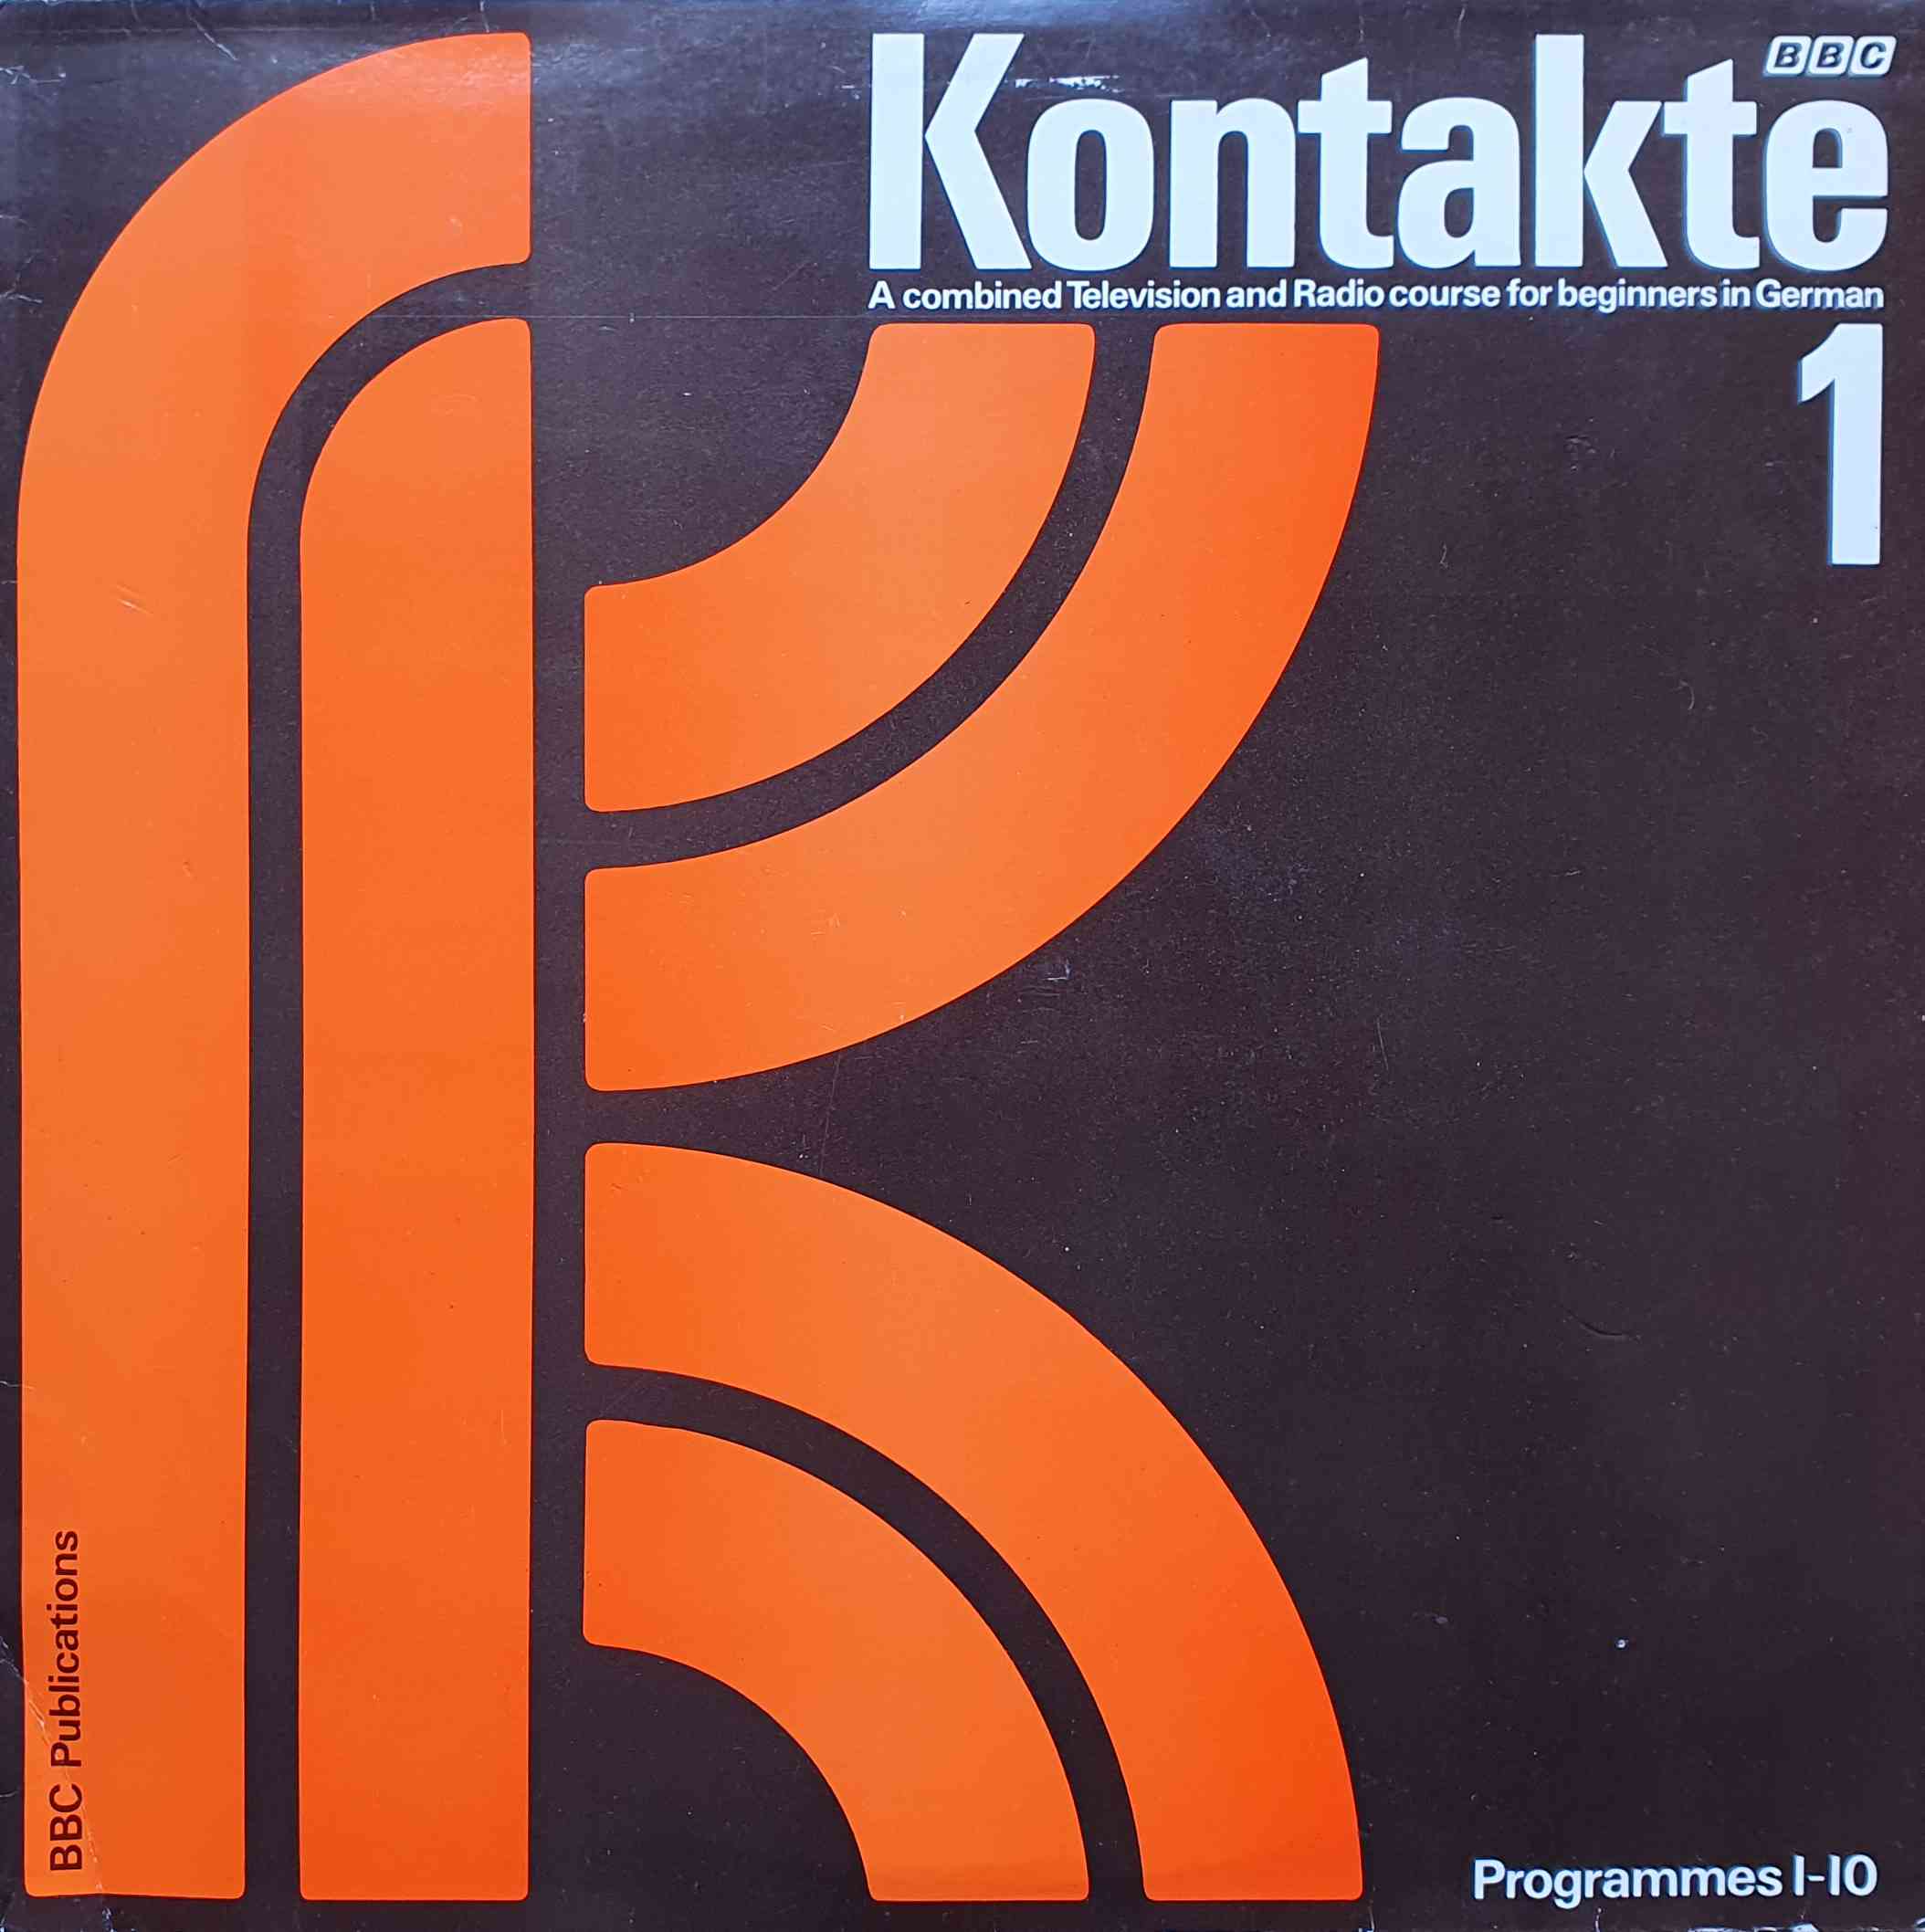 Picture of OP 213 Kontakte - A combined Television and Radio course for beginners in German - Record 1 - Programmes 1 - 10 by artist Corinna Schnabel / Antony Peck from the BBC albums - Records and Tapes library